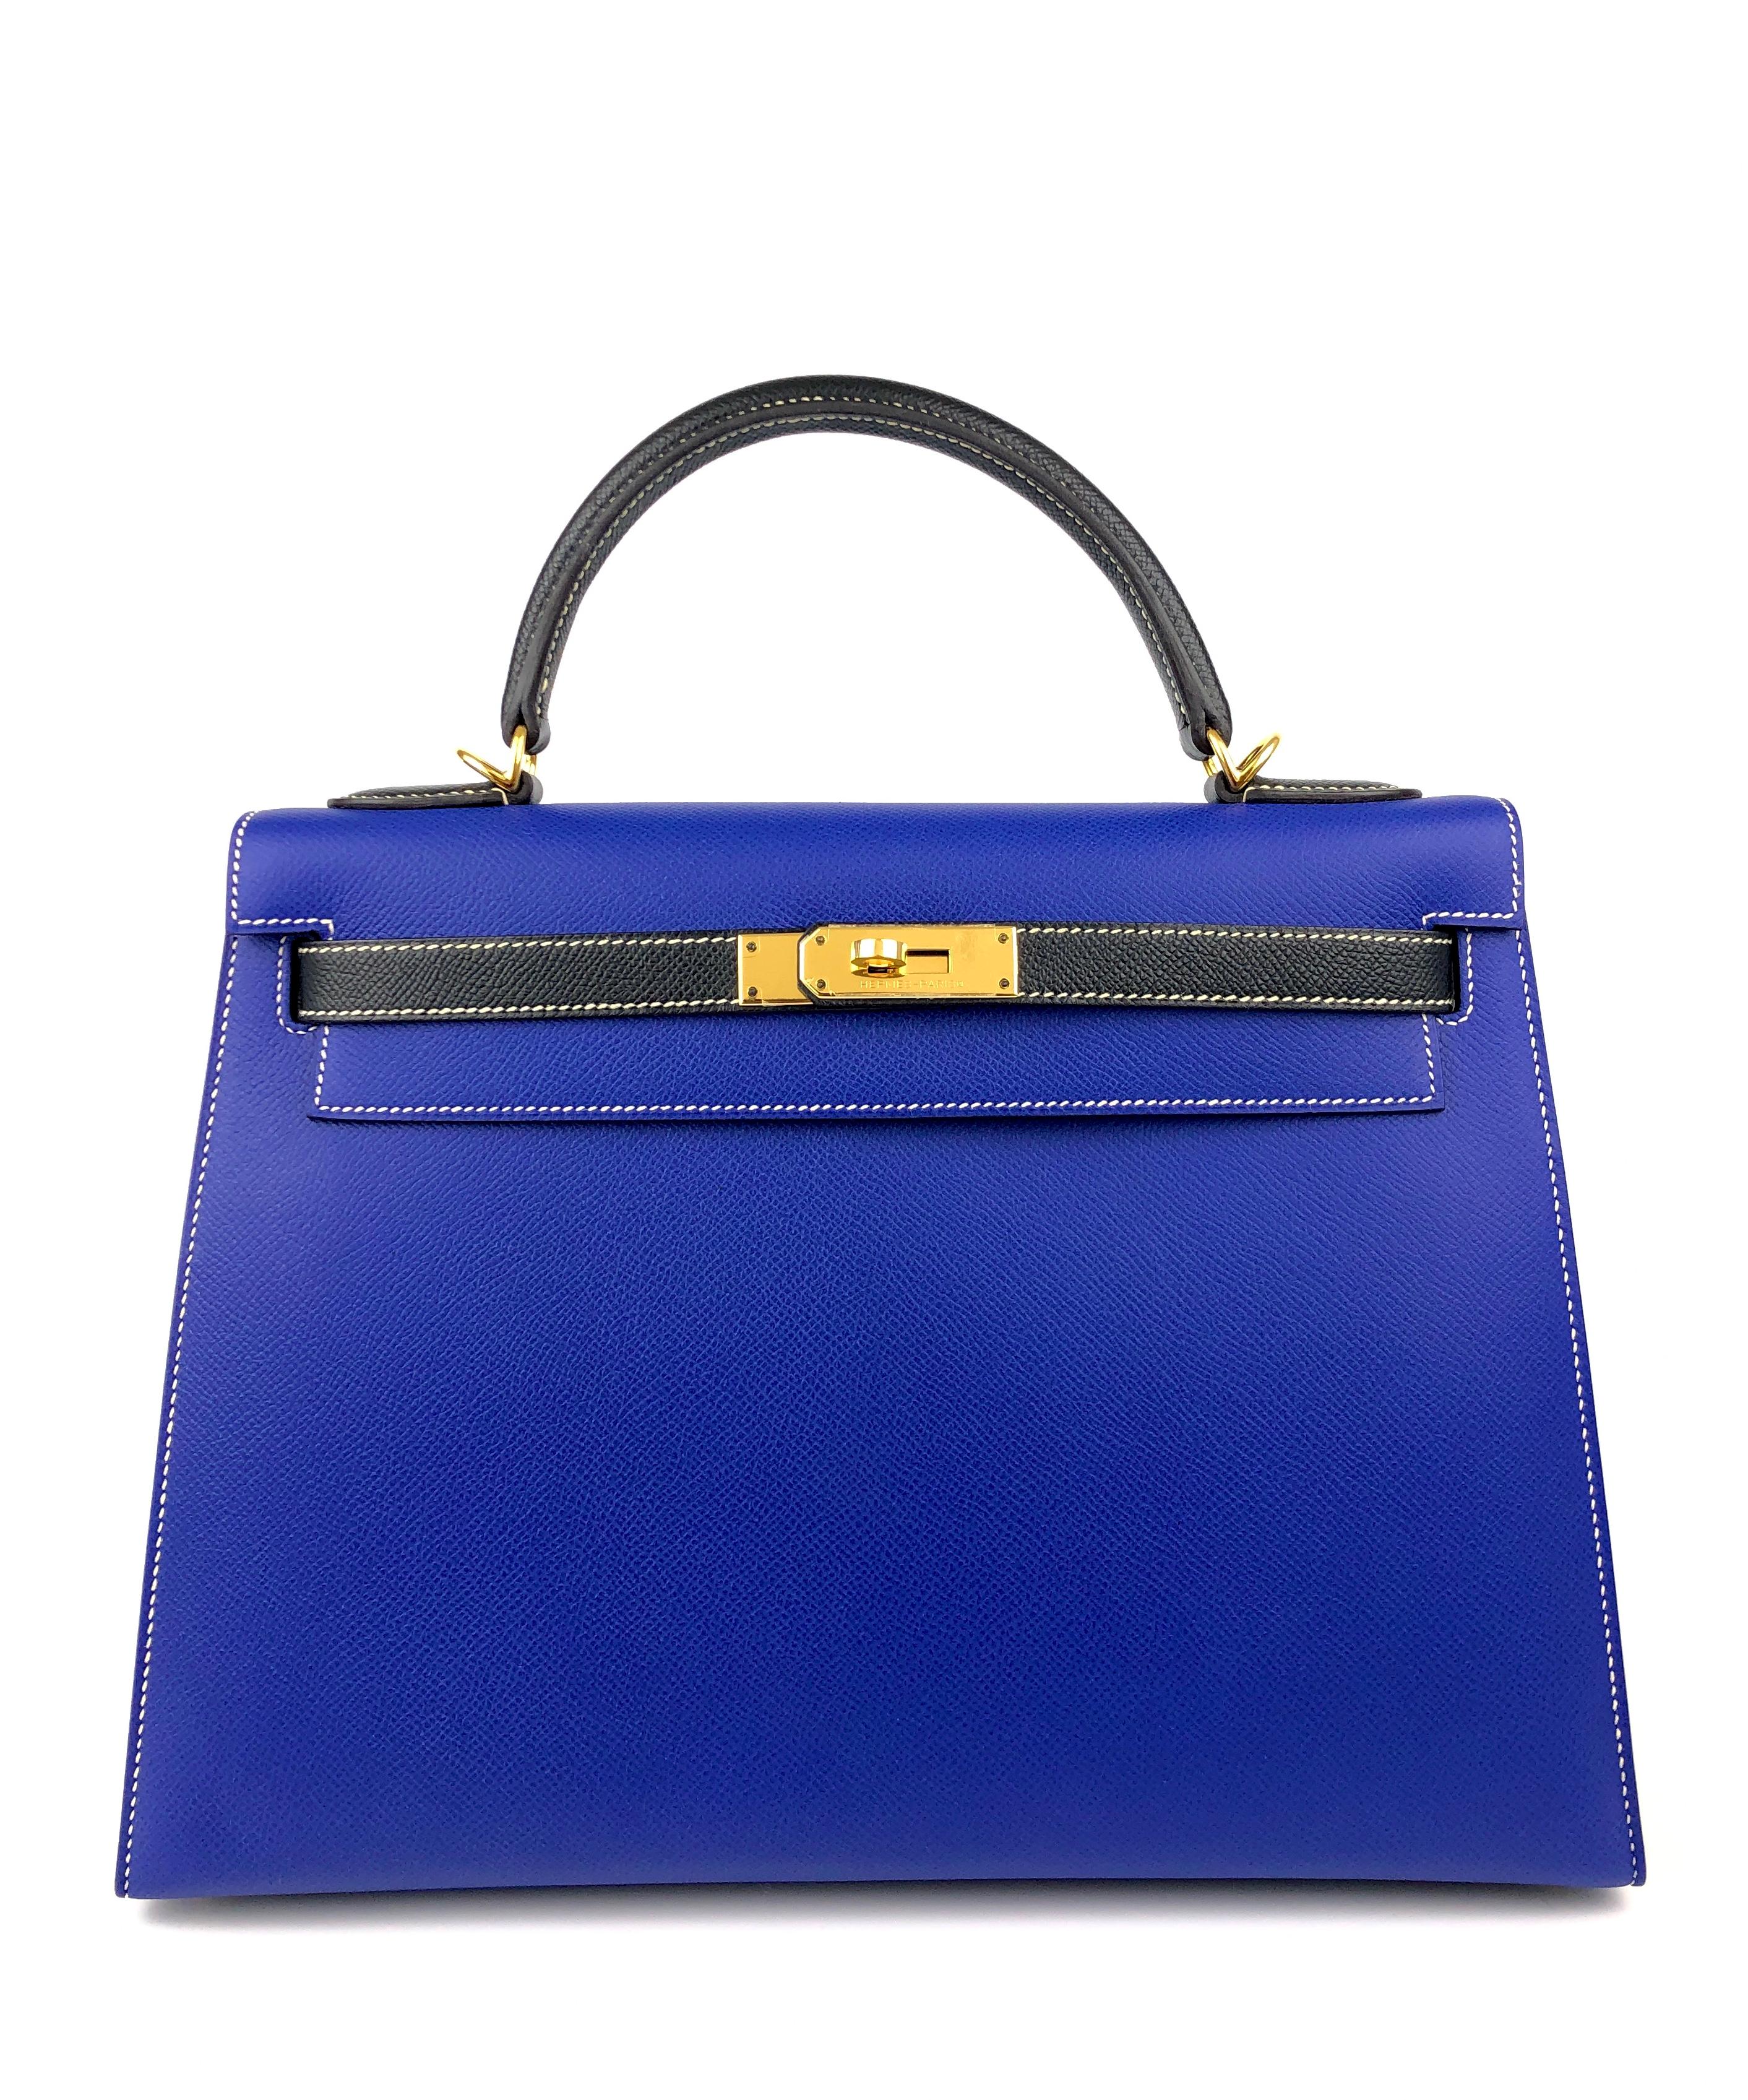 Absolutely Stunning Hermes Kelly 32 HSS Special Order Sellier Epsom Blue Electric & Black with White contrast Stitching. Gold Hardware. Pristine Condition Almost Like New! Plastic on Hardware and Feet! 

Shop with confidence from Lux Addicts.